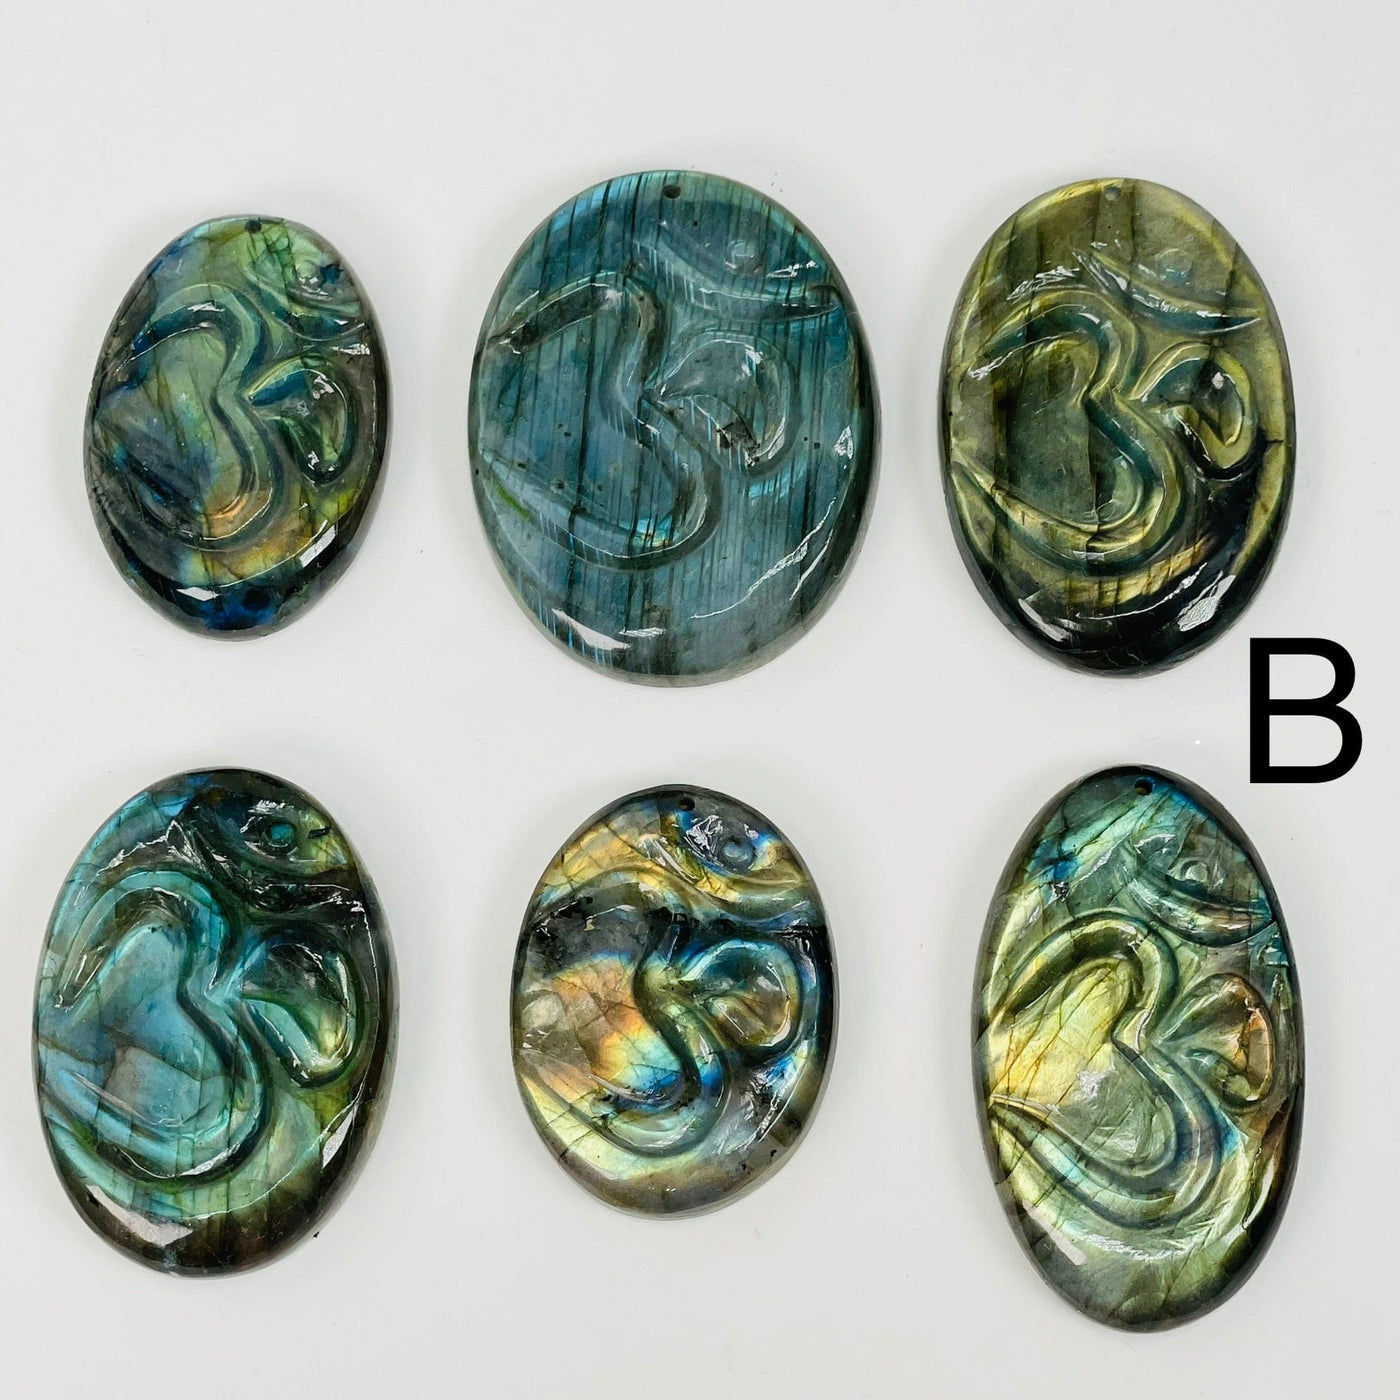 option B is for oval shaped pendants 